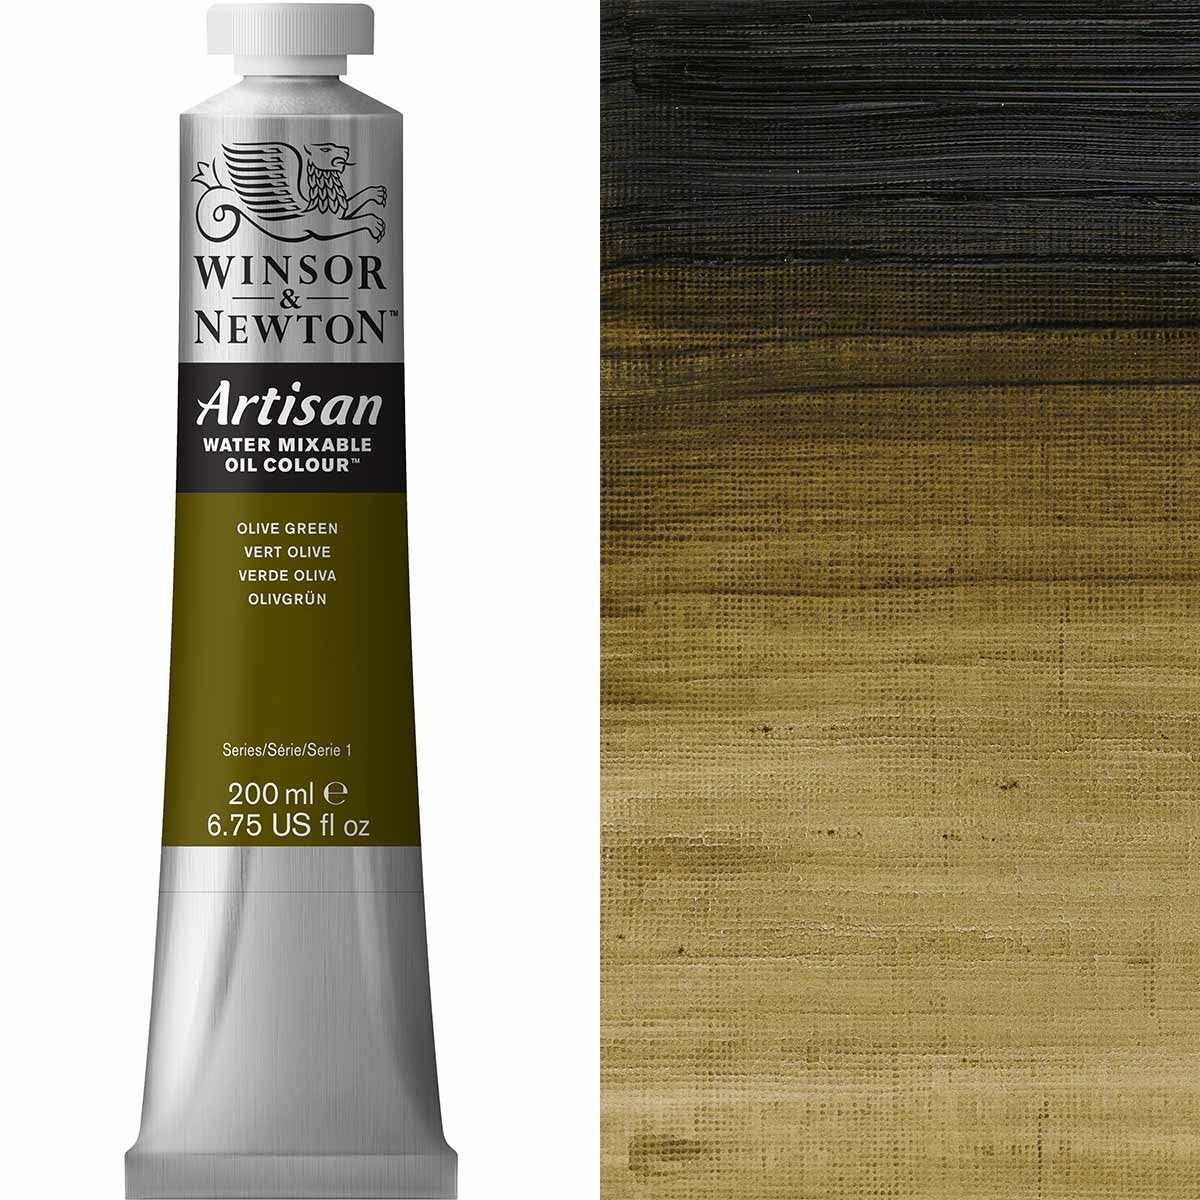 Winsor en Newton - Artisan Oil Color Water Mixable - 200 ml - Olive Green